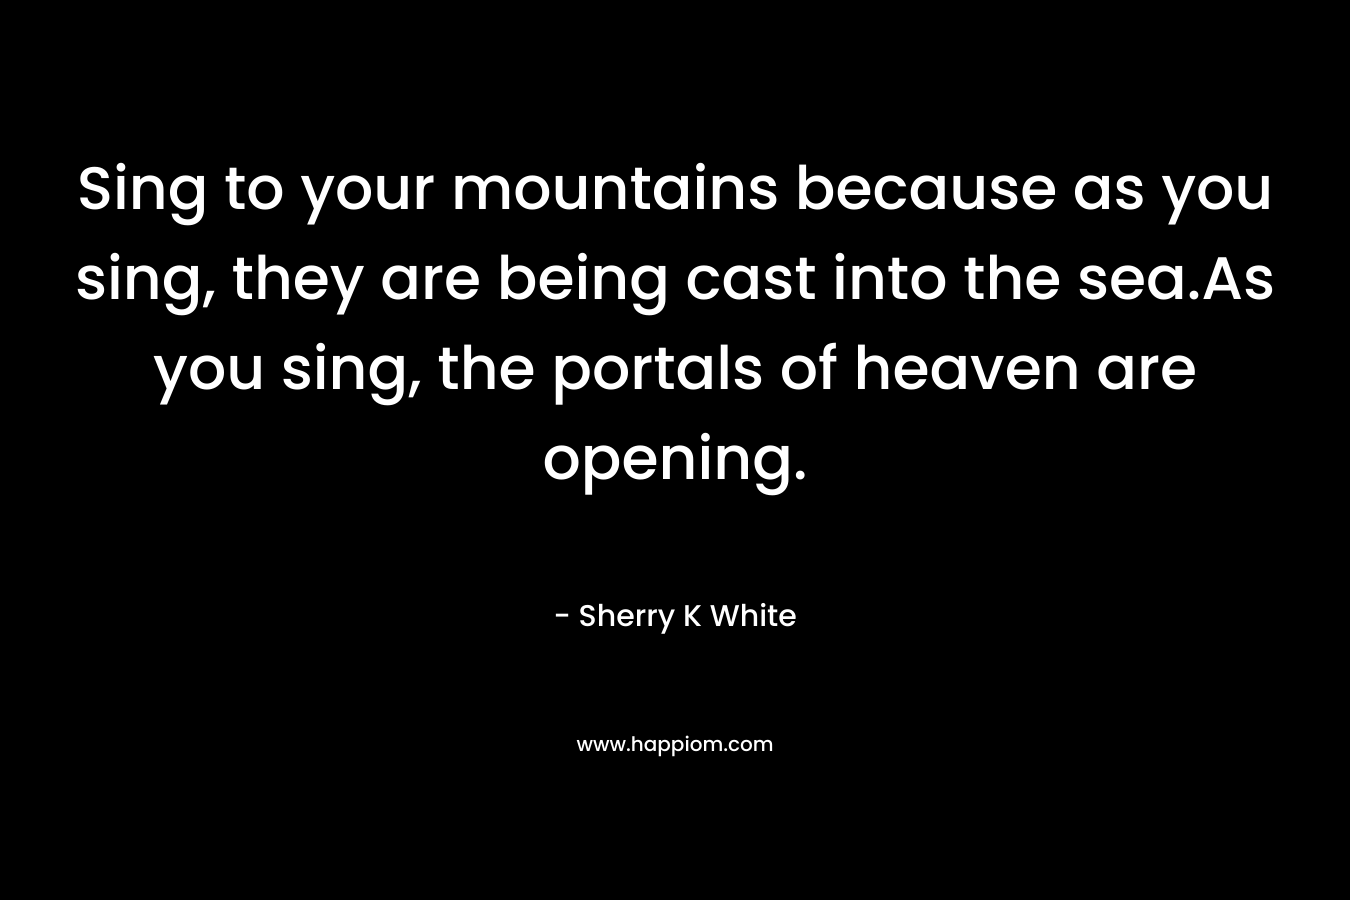 Sing to your mountains because as you sing, they are being cast into the sea.As you sing, the portals of heaven are opening. – Sherry K White